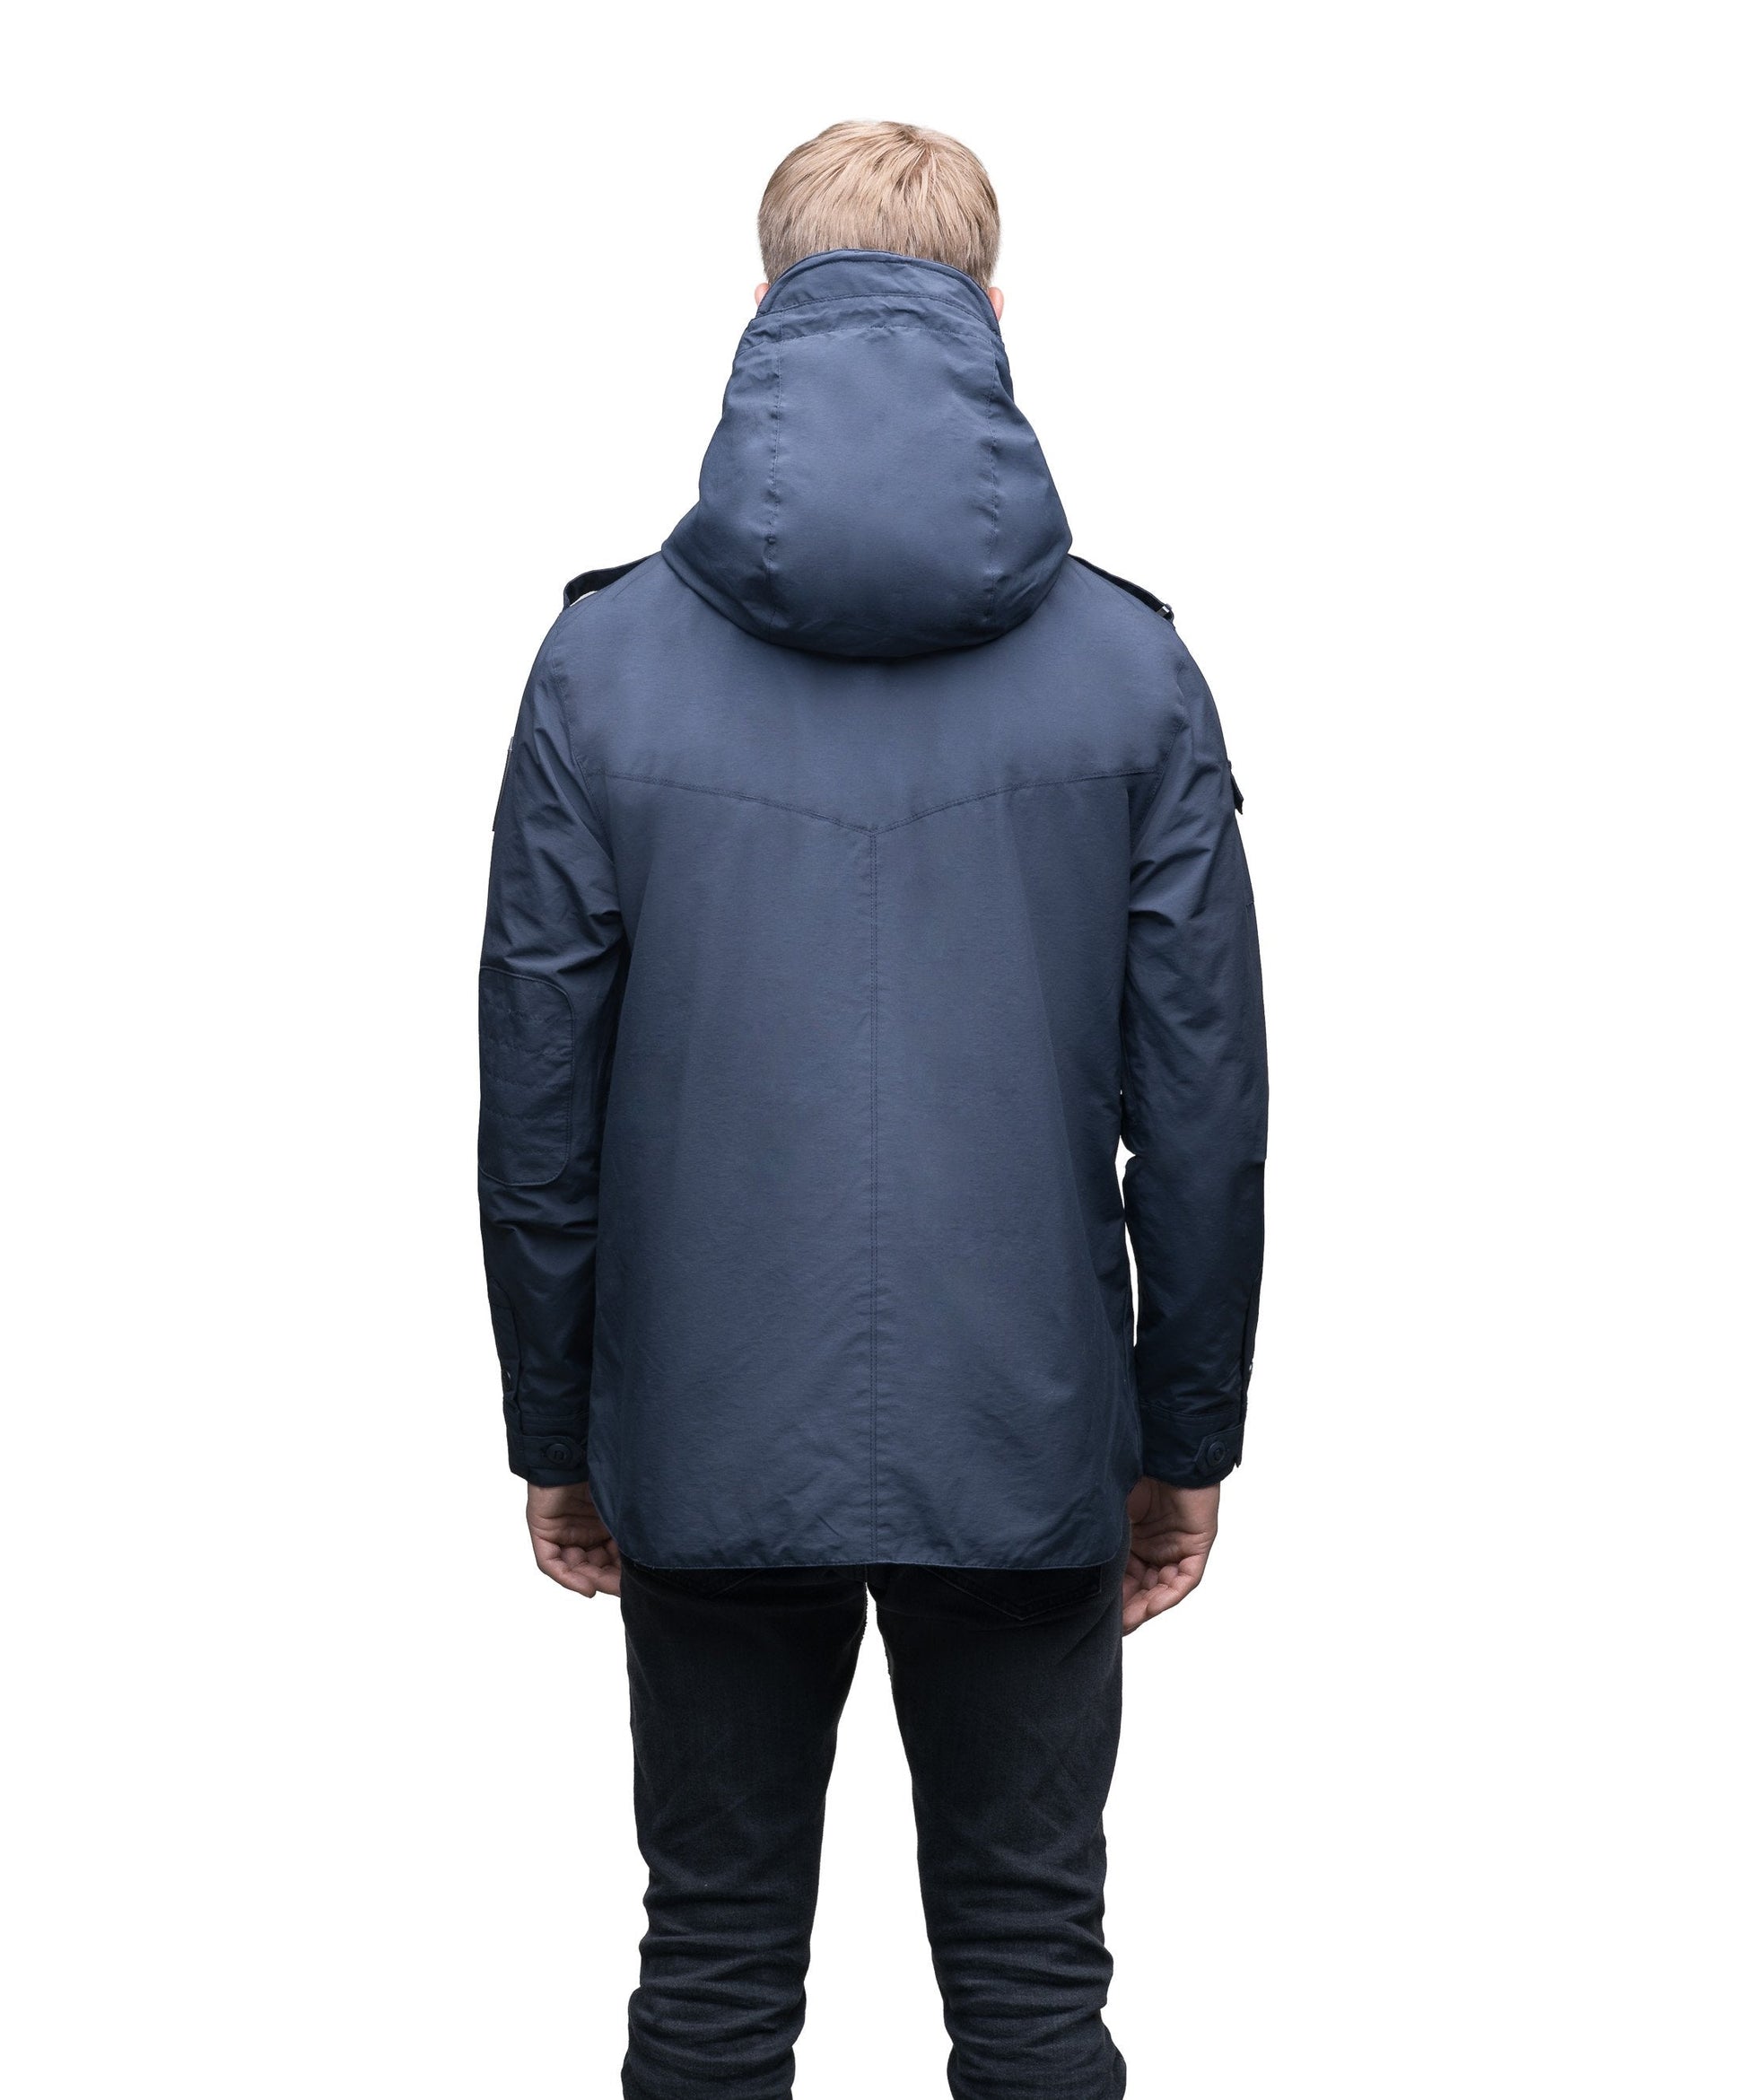 Men's hooded shirt jacket with patch chest pockets in Navy